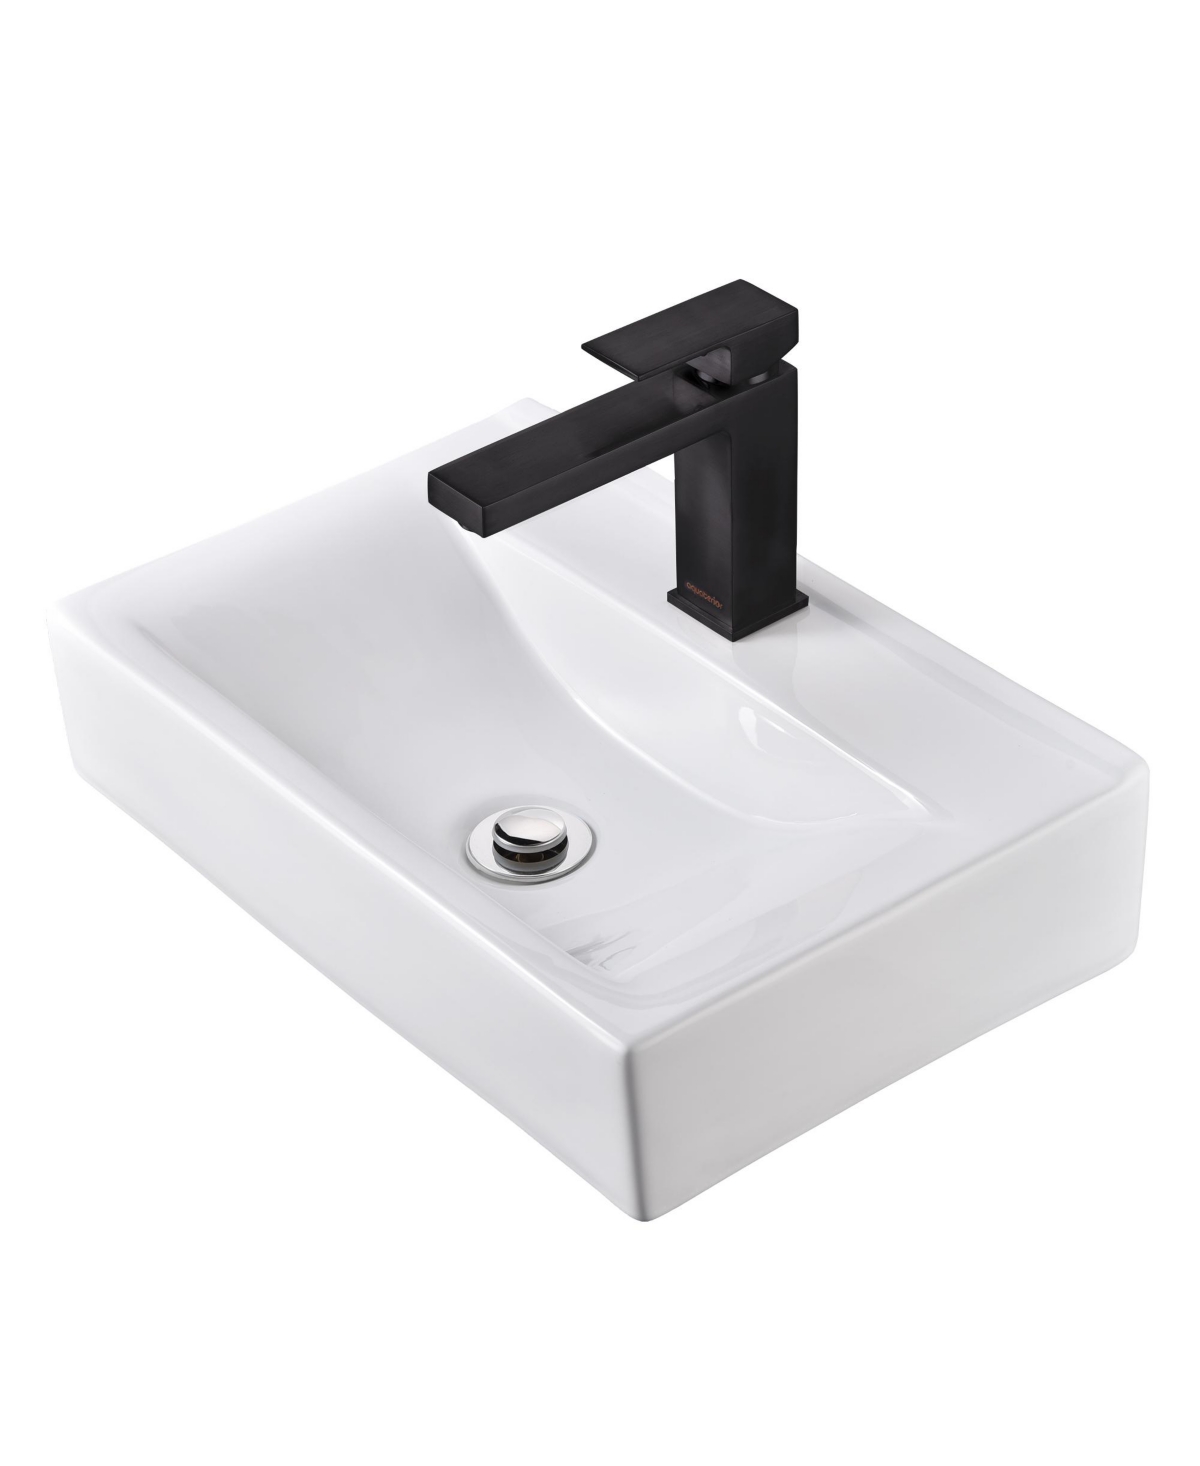 Wall Mount Ceramic Vessel Sink 1 Hole Square Faucet Drain Bathroom - Natural